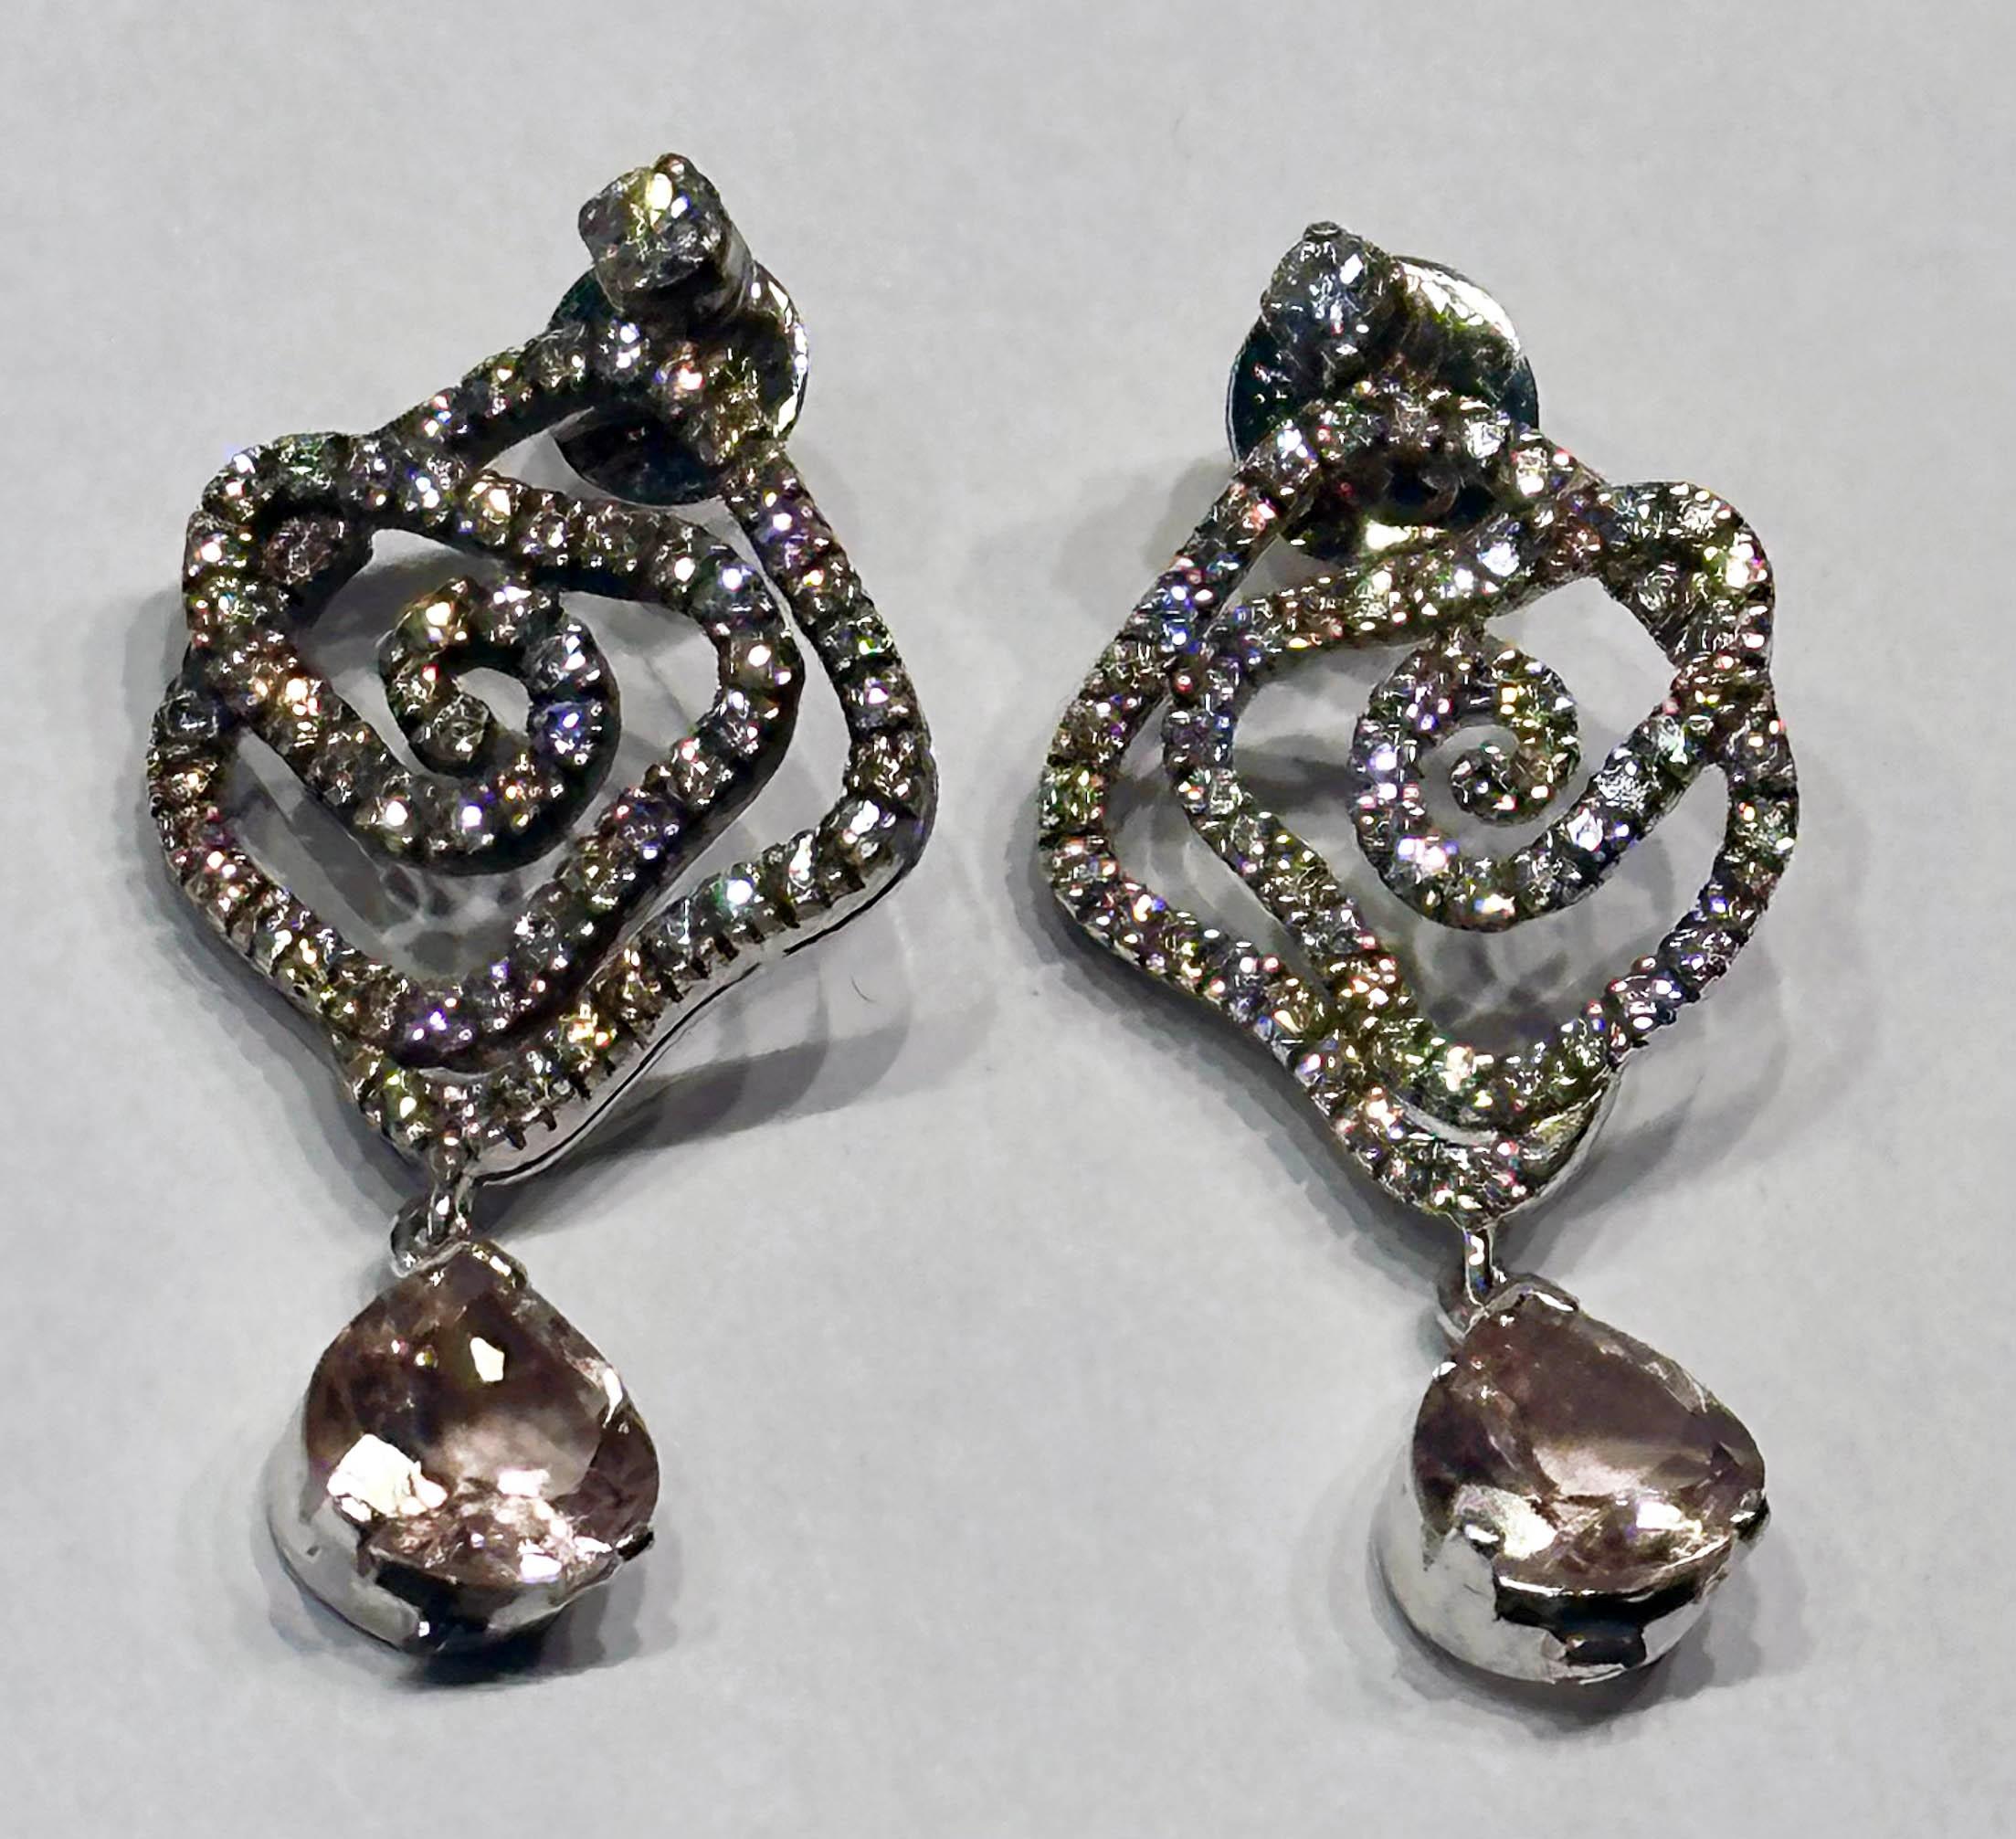 A Pair of Blackened 18kt White Gold Diamond Earrings with Morganite Dangles For Sale 3